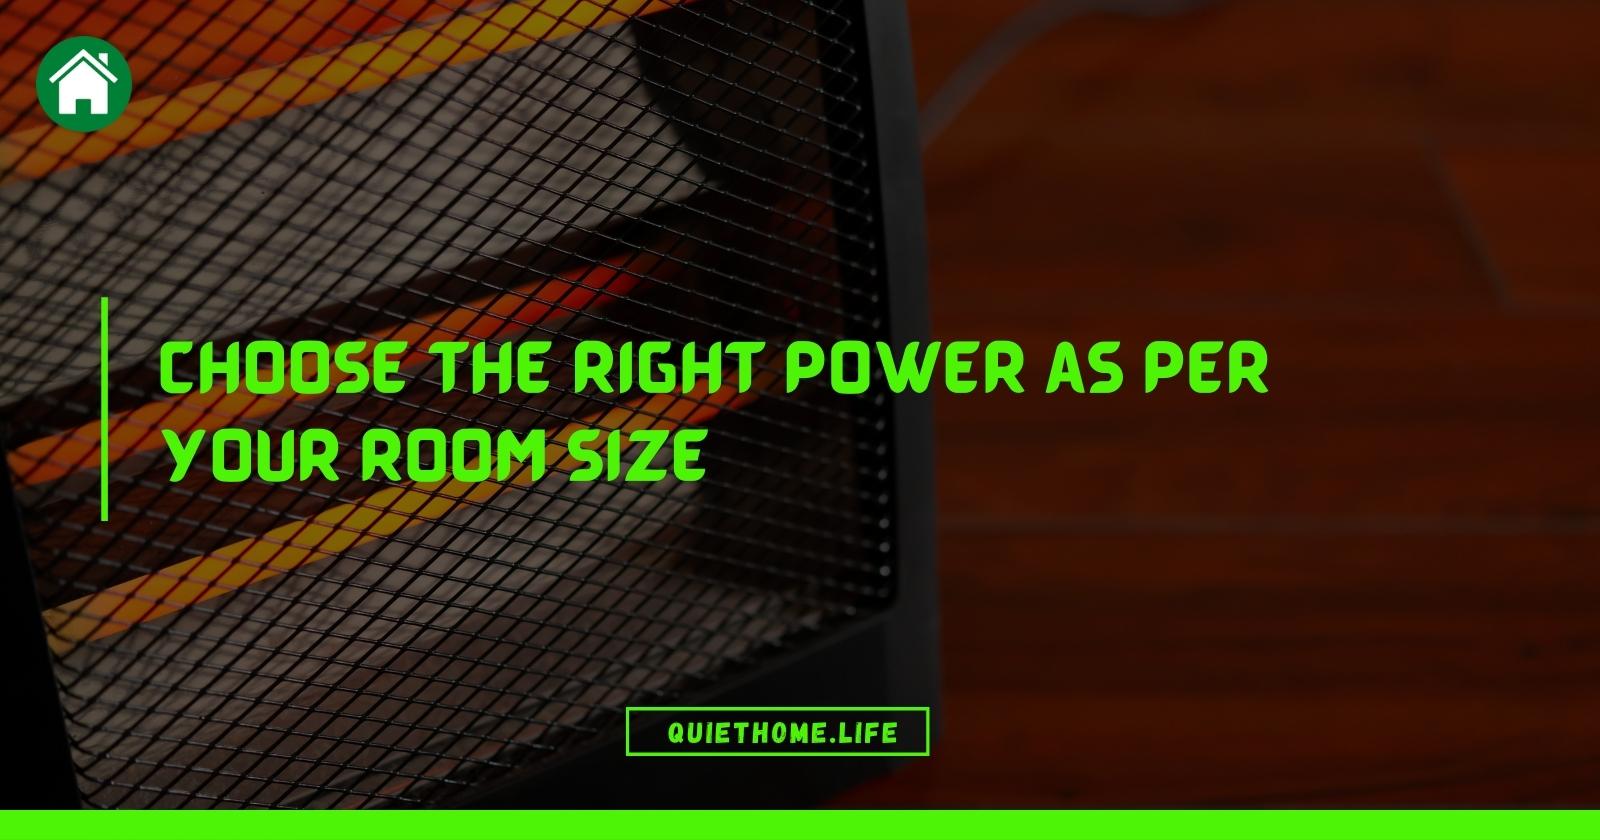 Choose the right power as per your room size